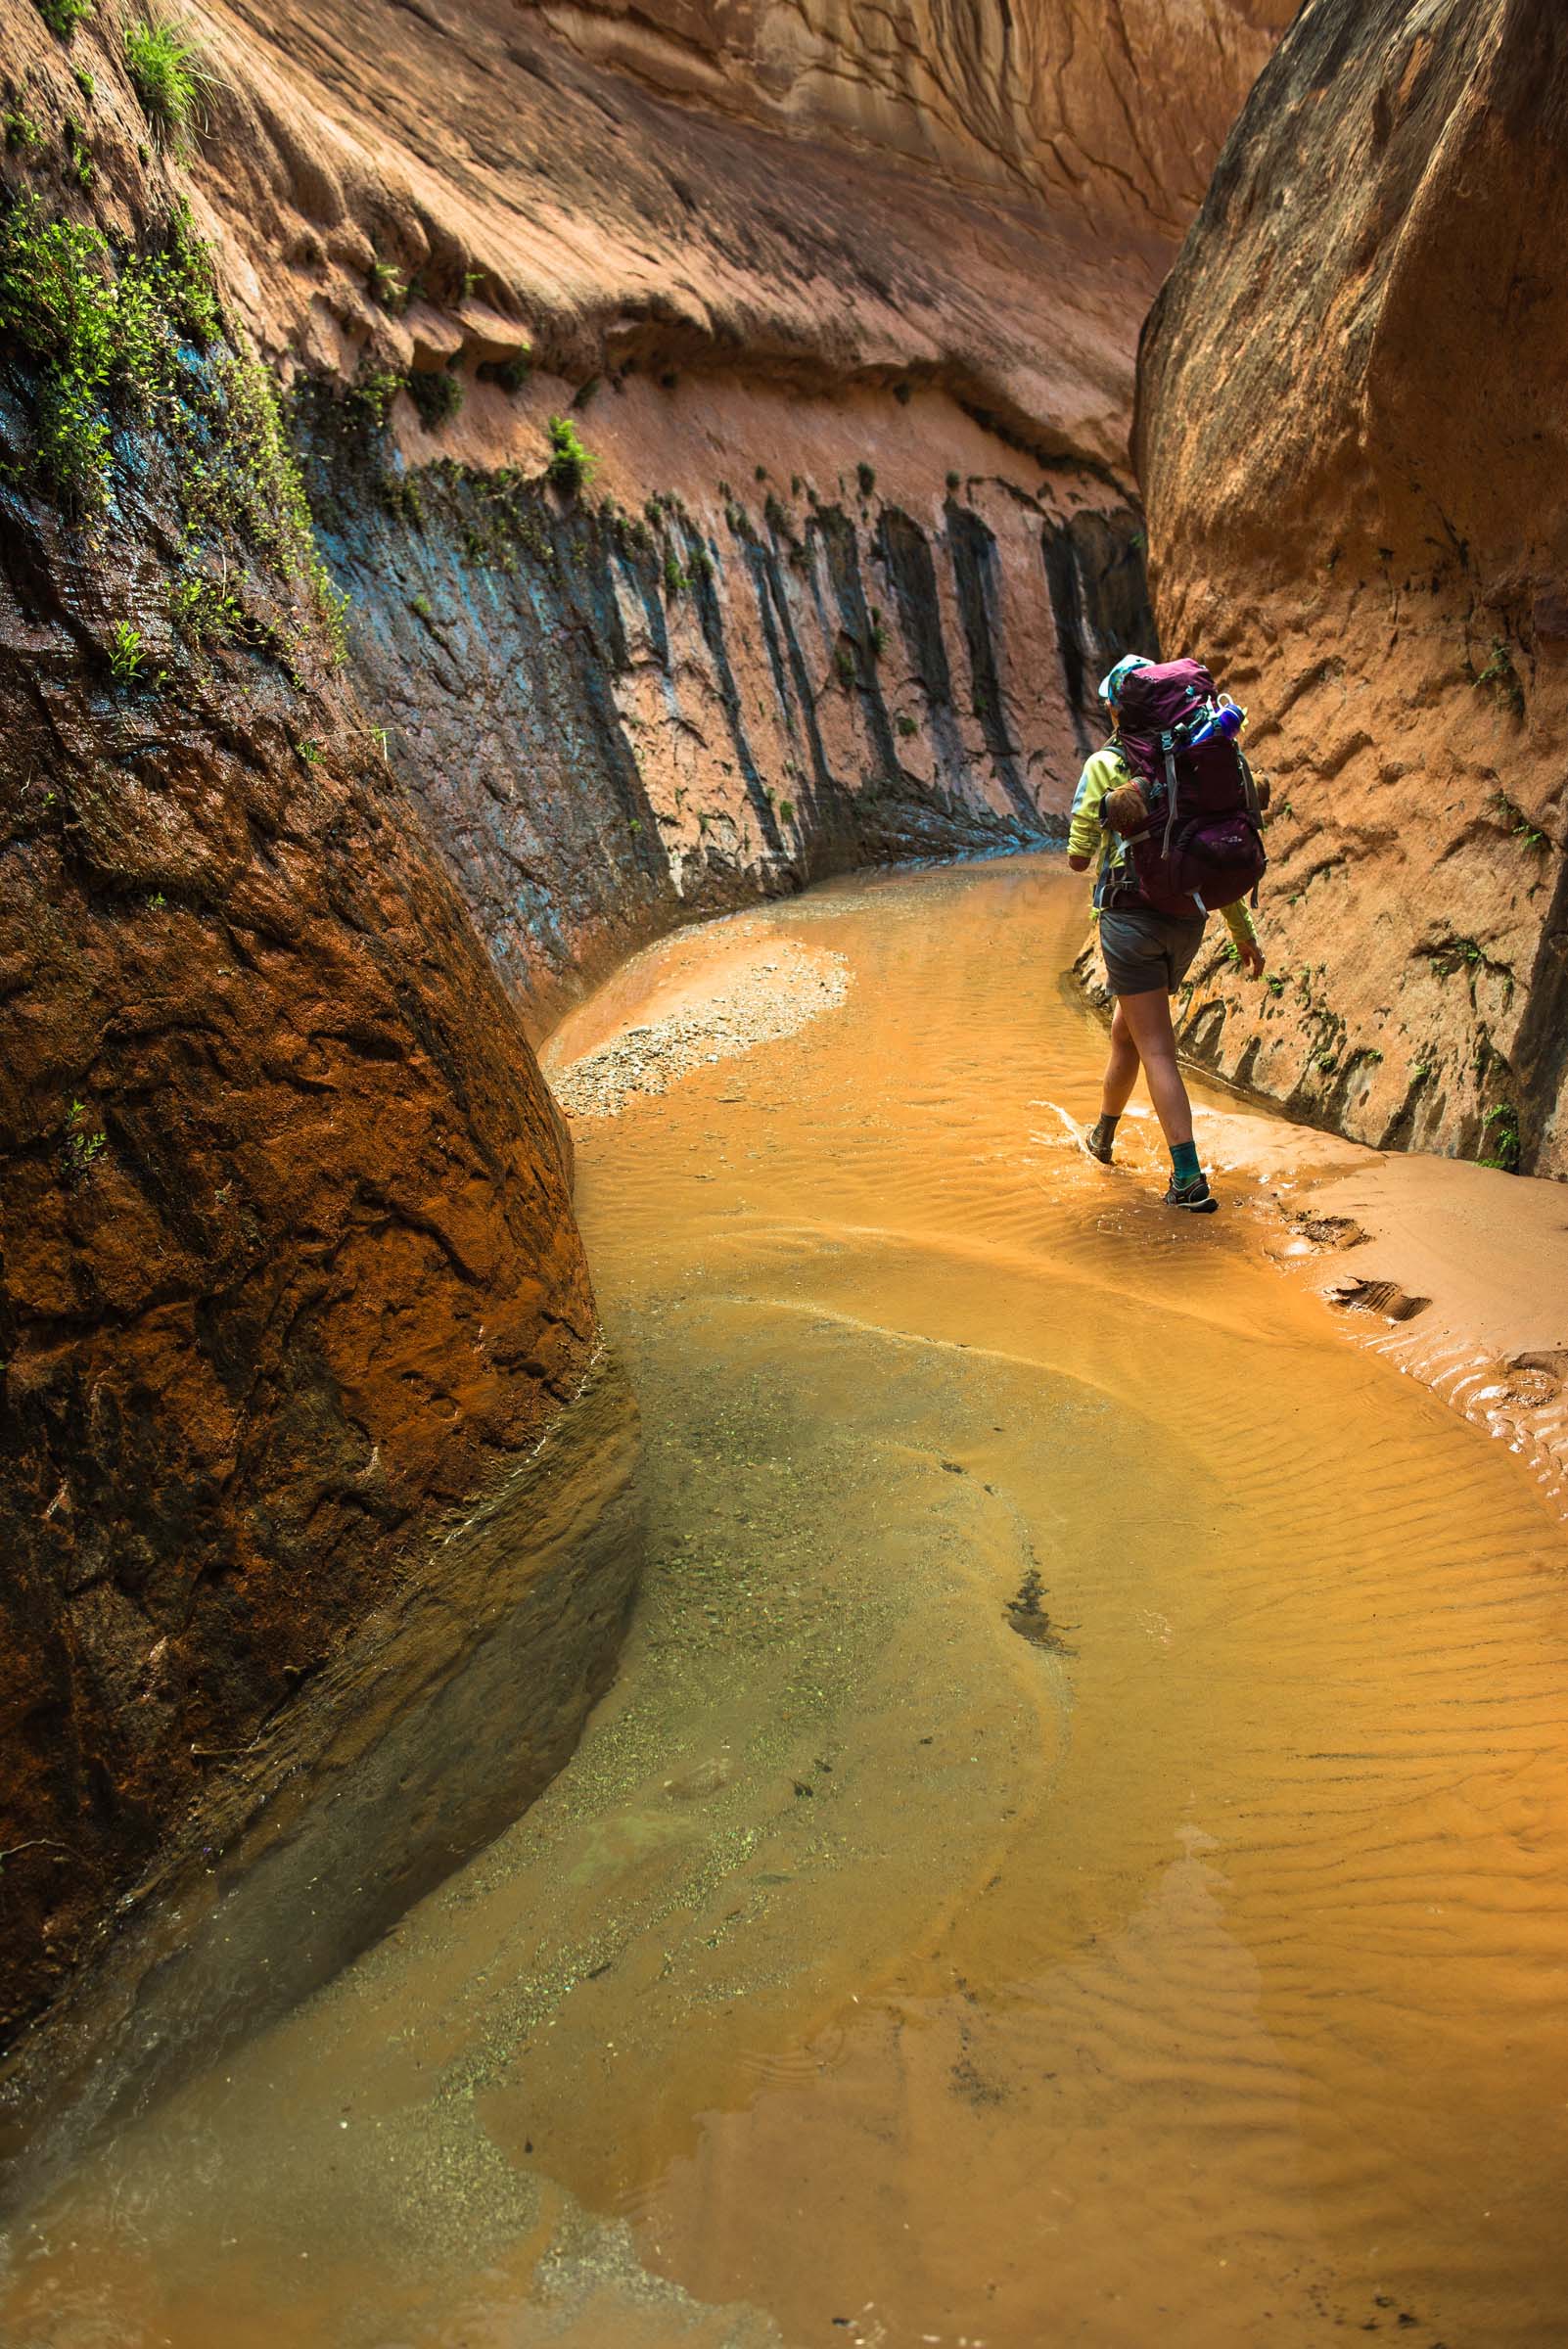 A woman backpacker walks through a very colorful slot canyon.